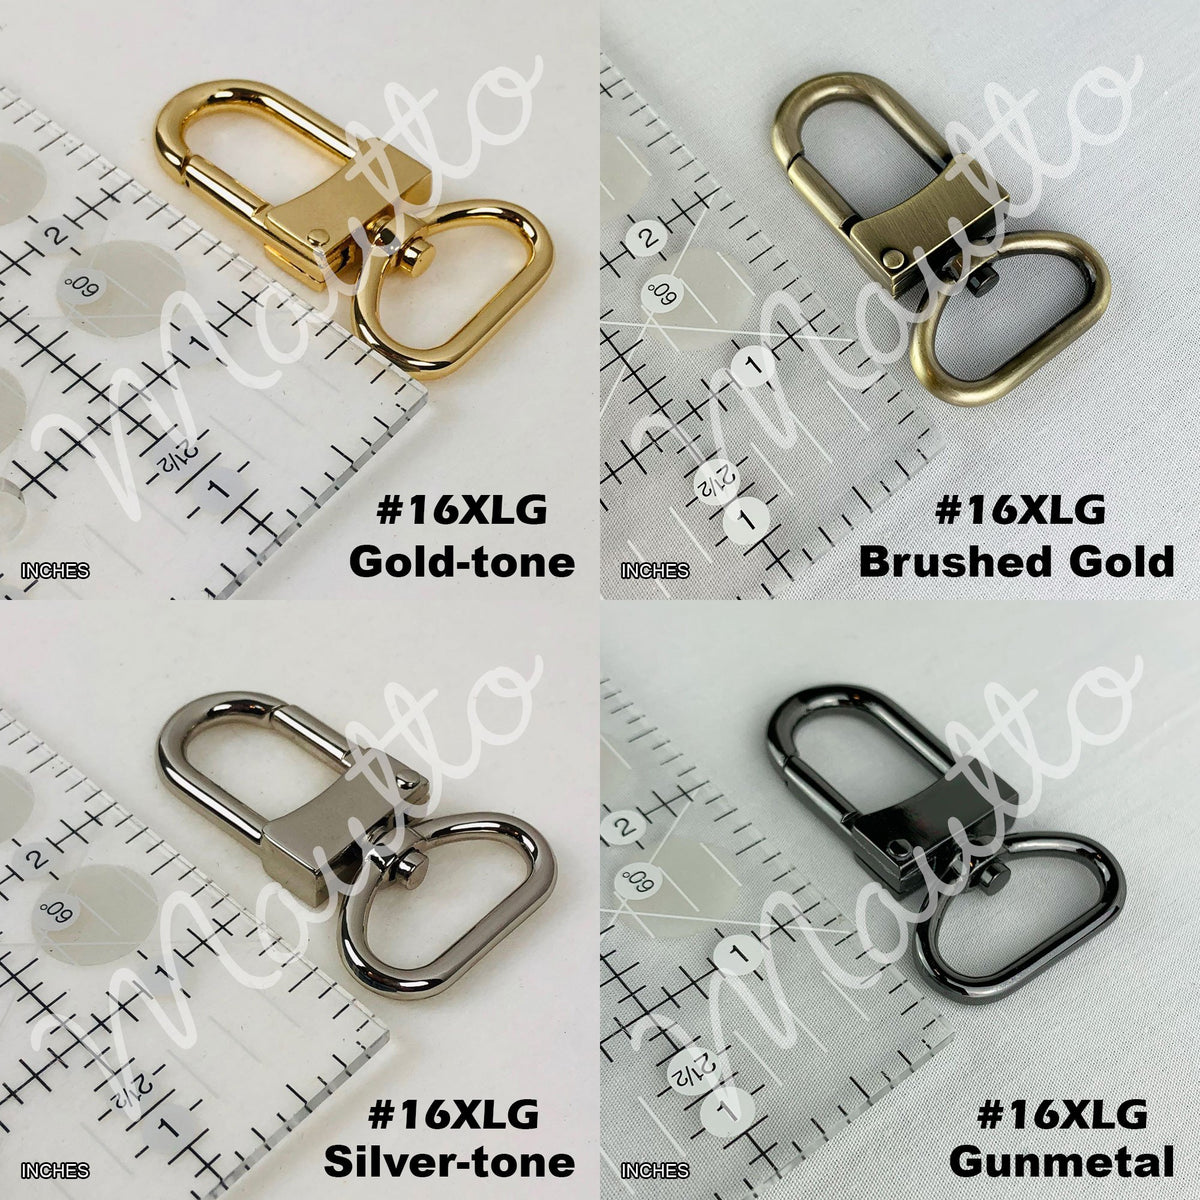 Snap Clips for Louis Vuitton Bag Shoulder Strap 3/4'' Replacement Gold  Finish